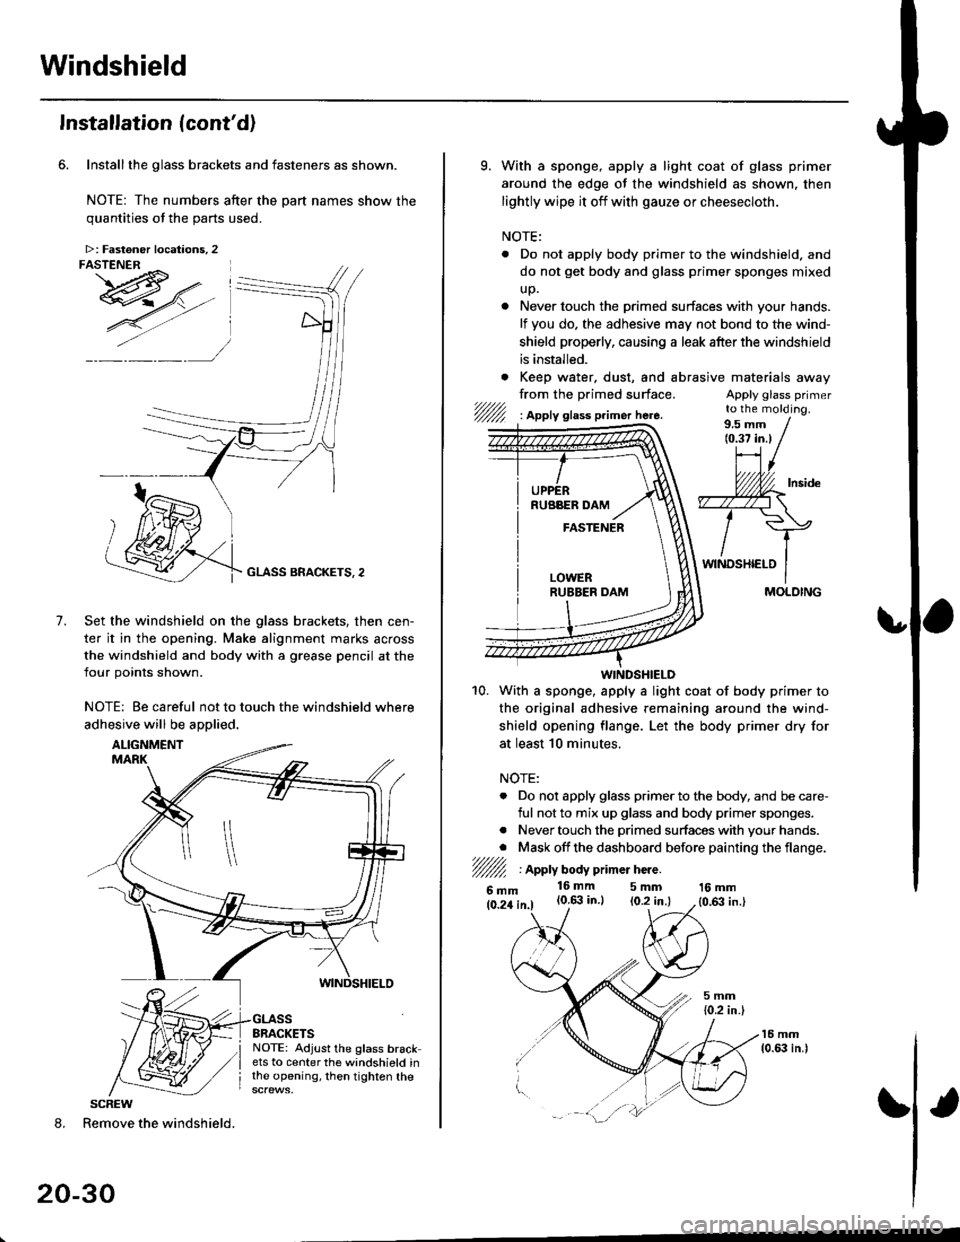 HONDA CIVIC 2000 6.G Workshop Manual Windshield
Installation (contd)
Installthe glass brackets and fasteners as shown.
NOTE: The numbers after the part names show thequantities of the oarts used.
GLASS BRACKETS, 2
Set the windshield on 